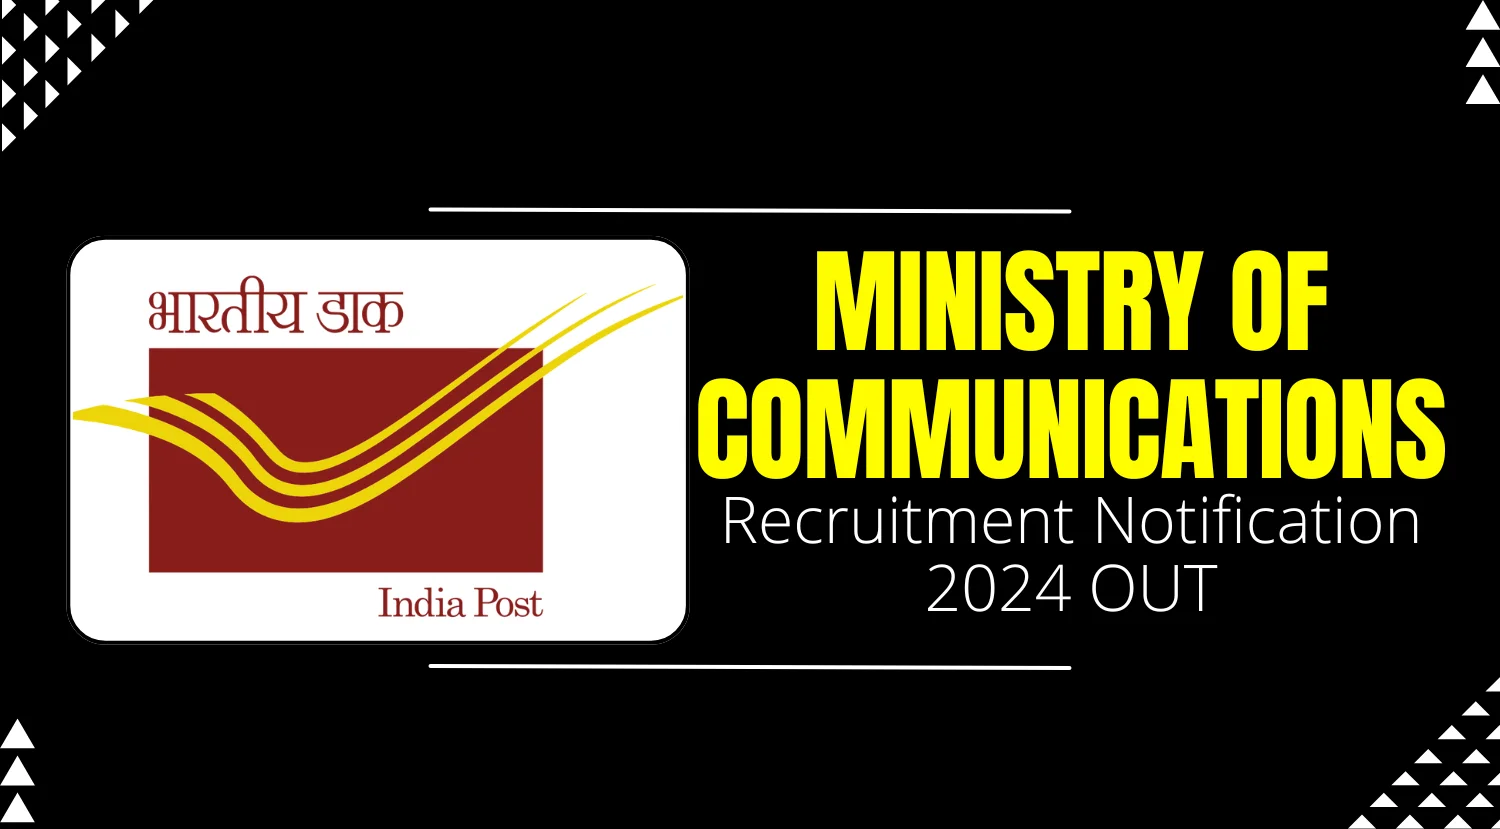 Ministry of Communications Recruitment 2024 Notification OUT